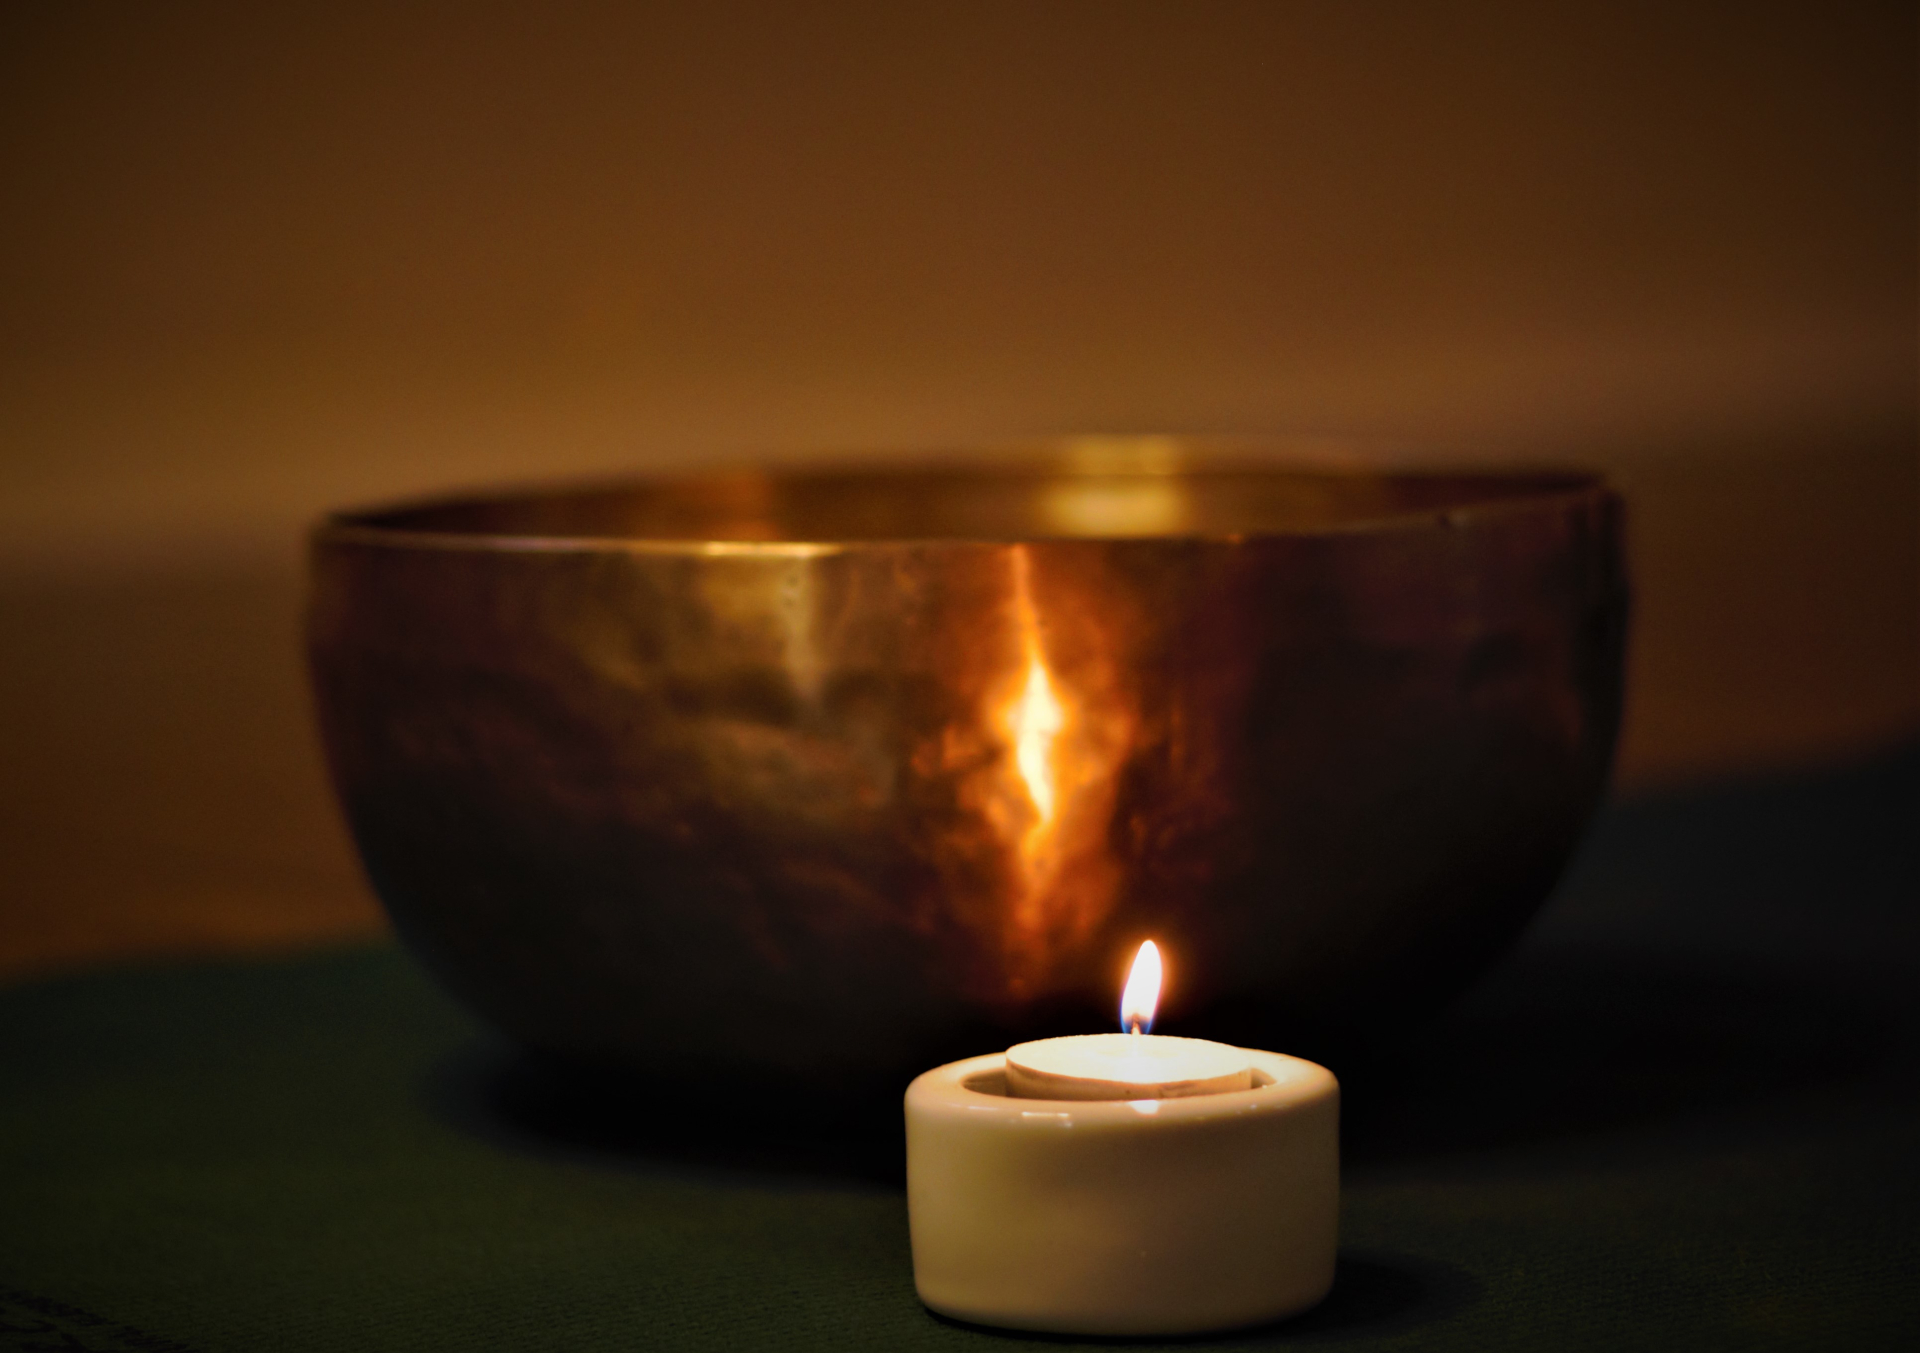 Lit tealight candle in front of bowl